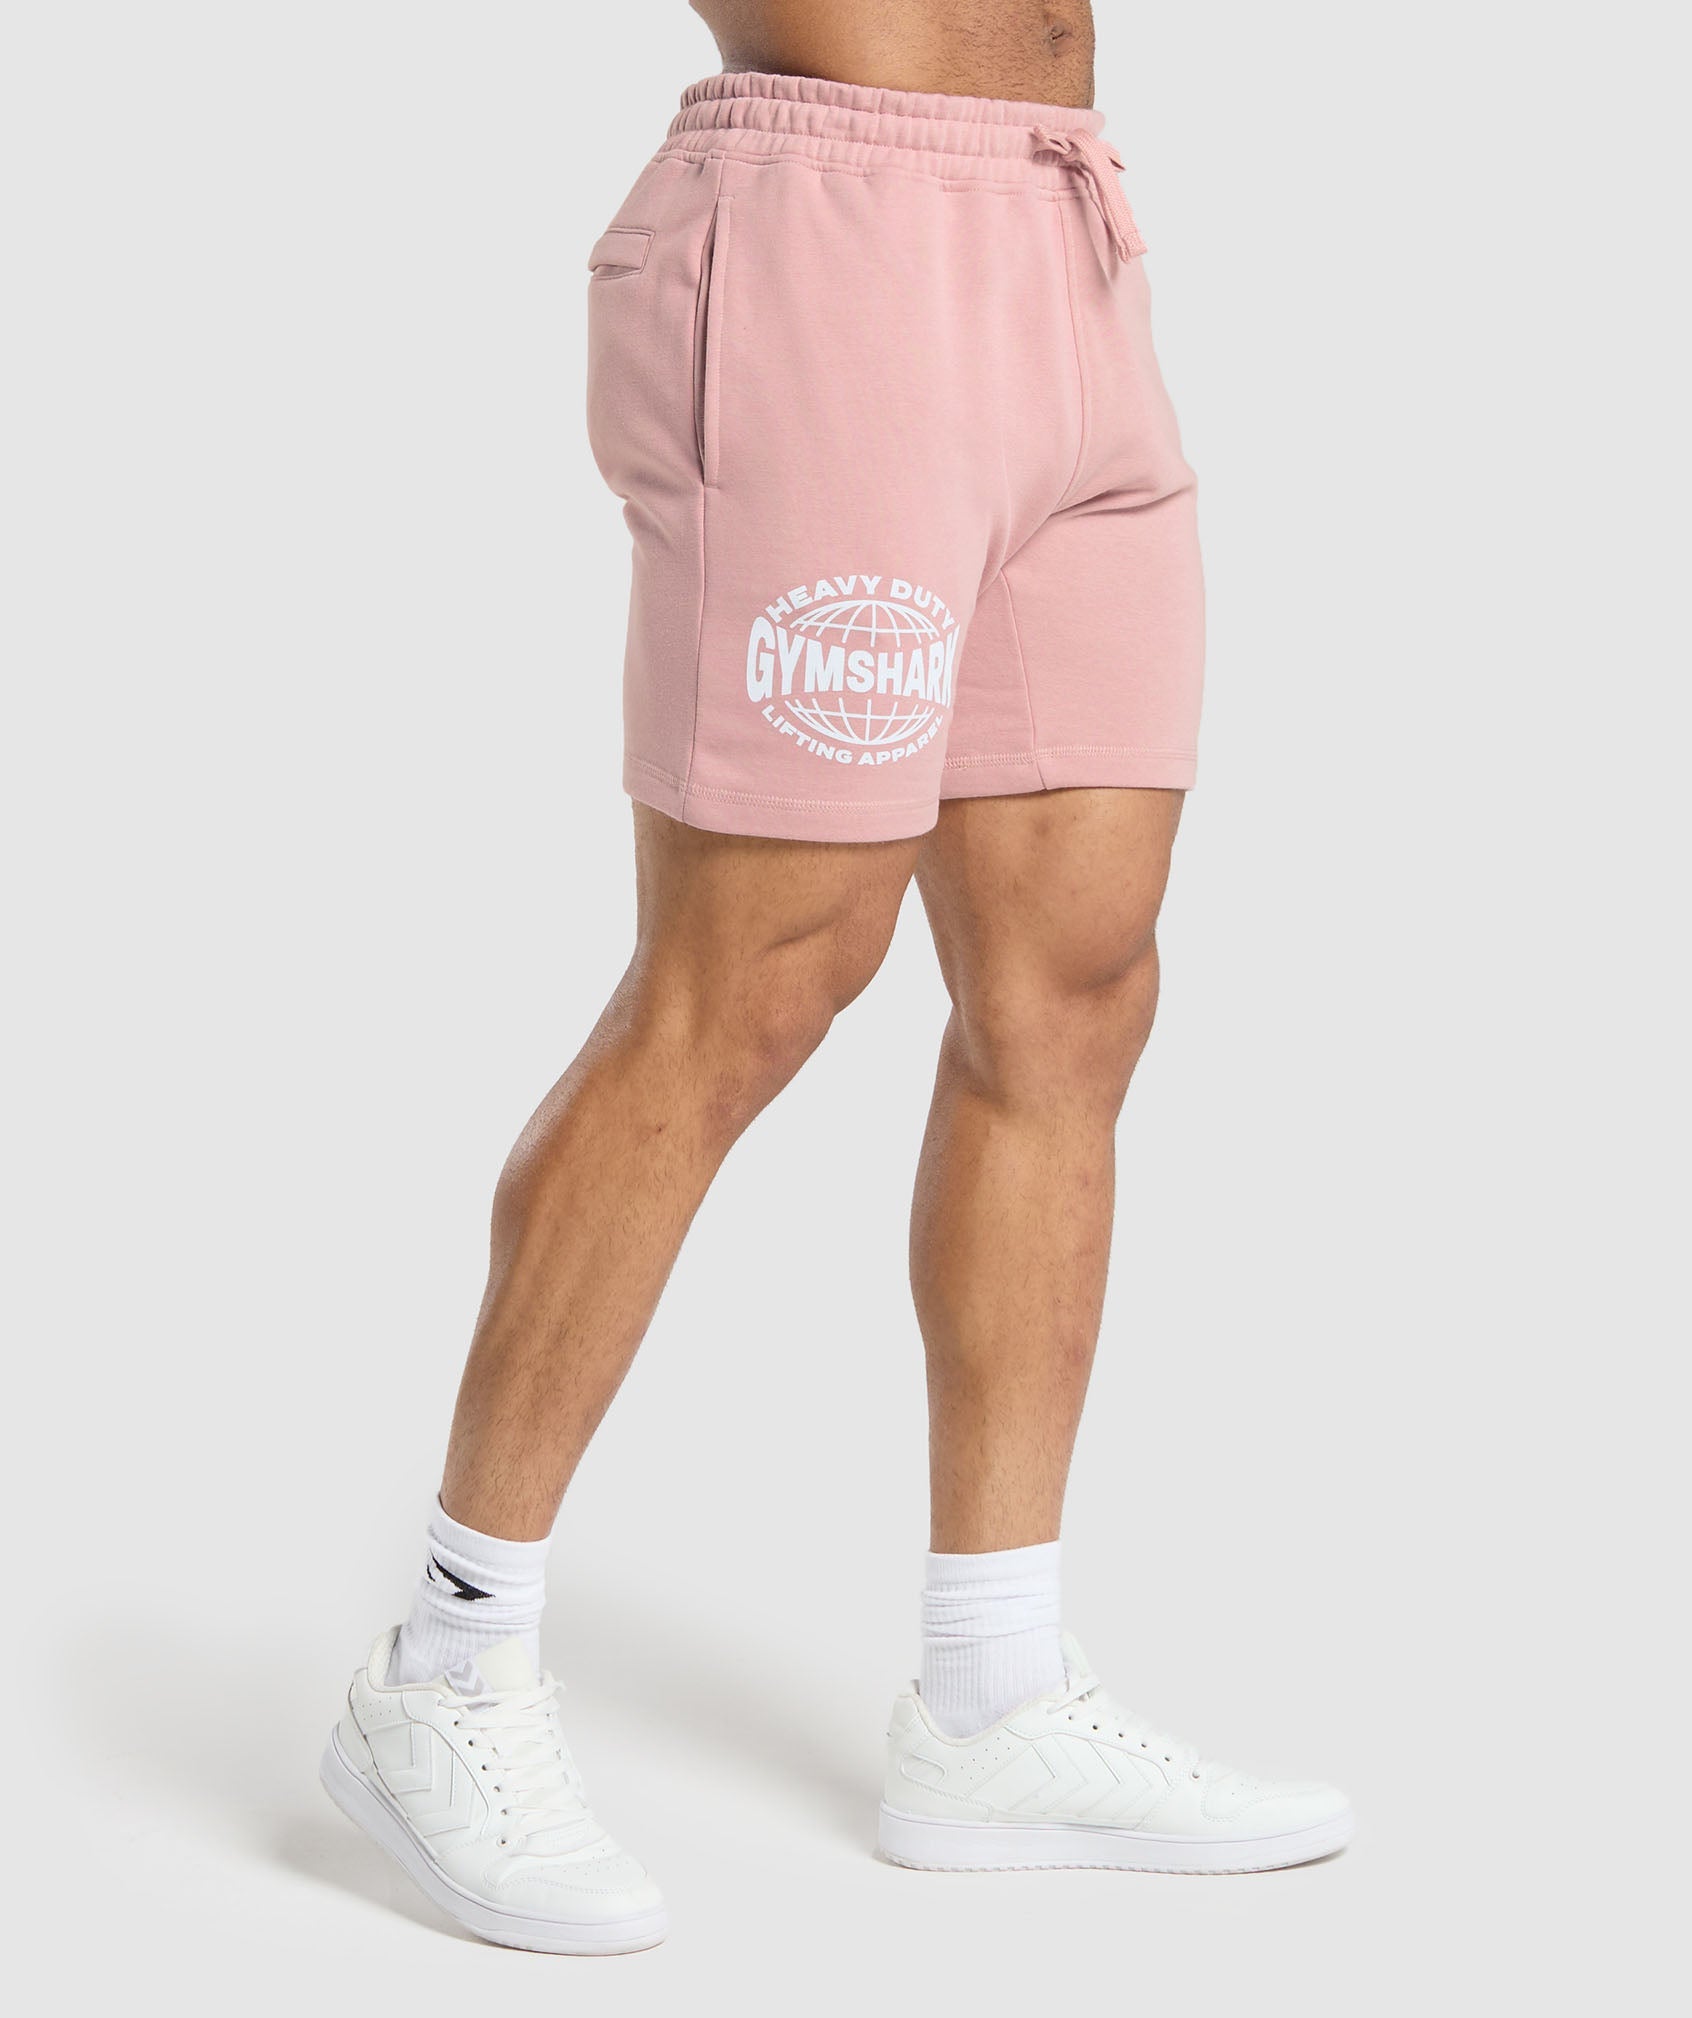 Heavy Duty Apparel 7" Shorts in Light Pink - view 3